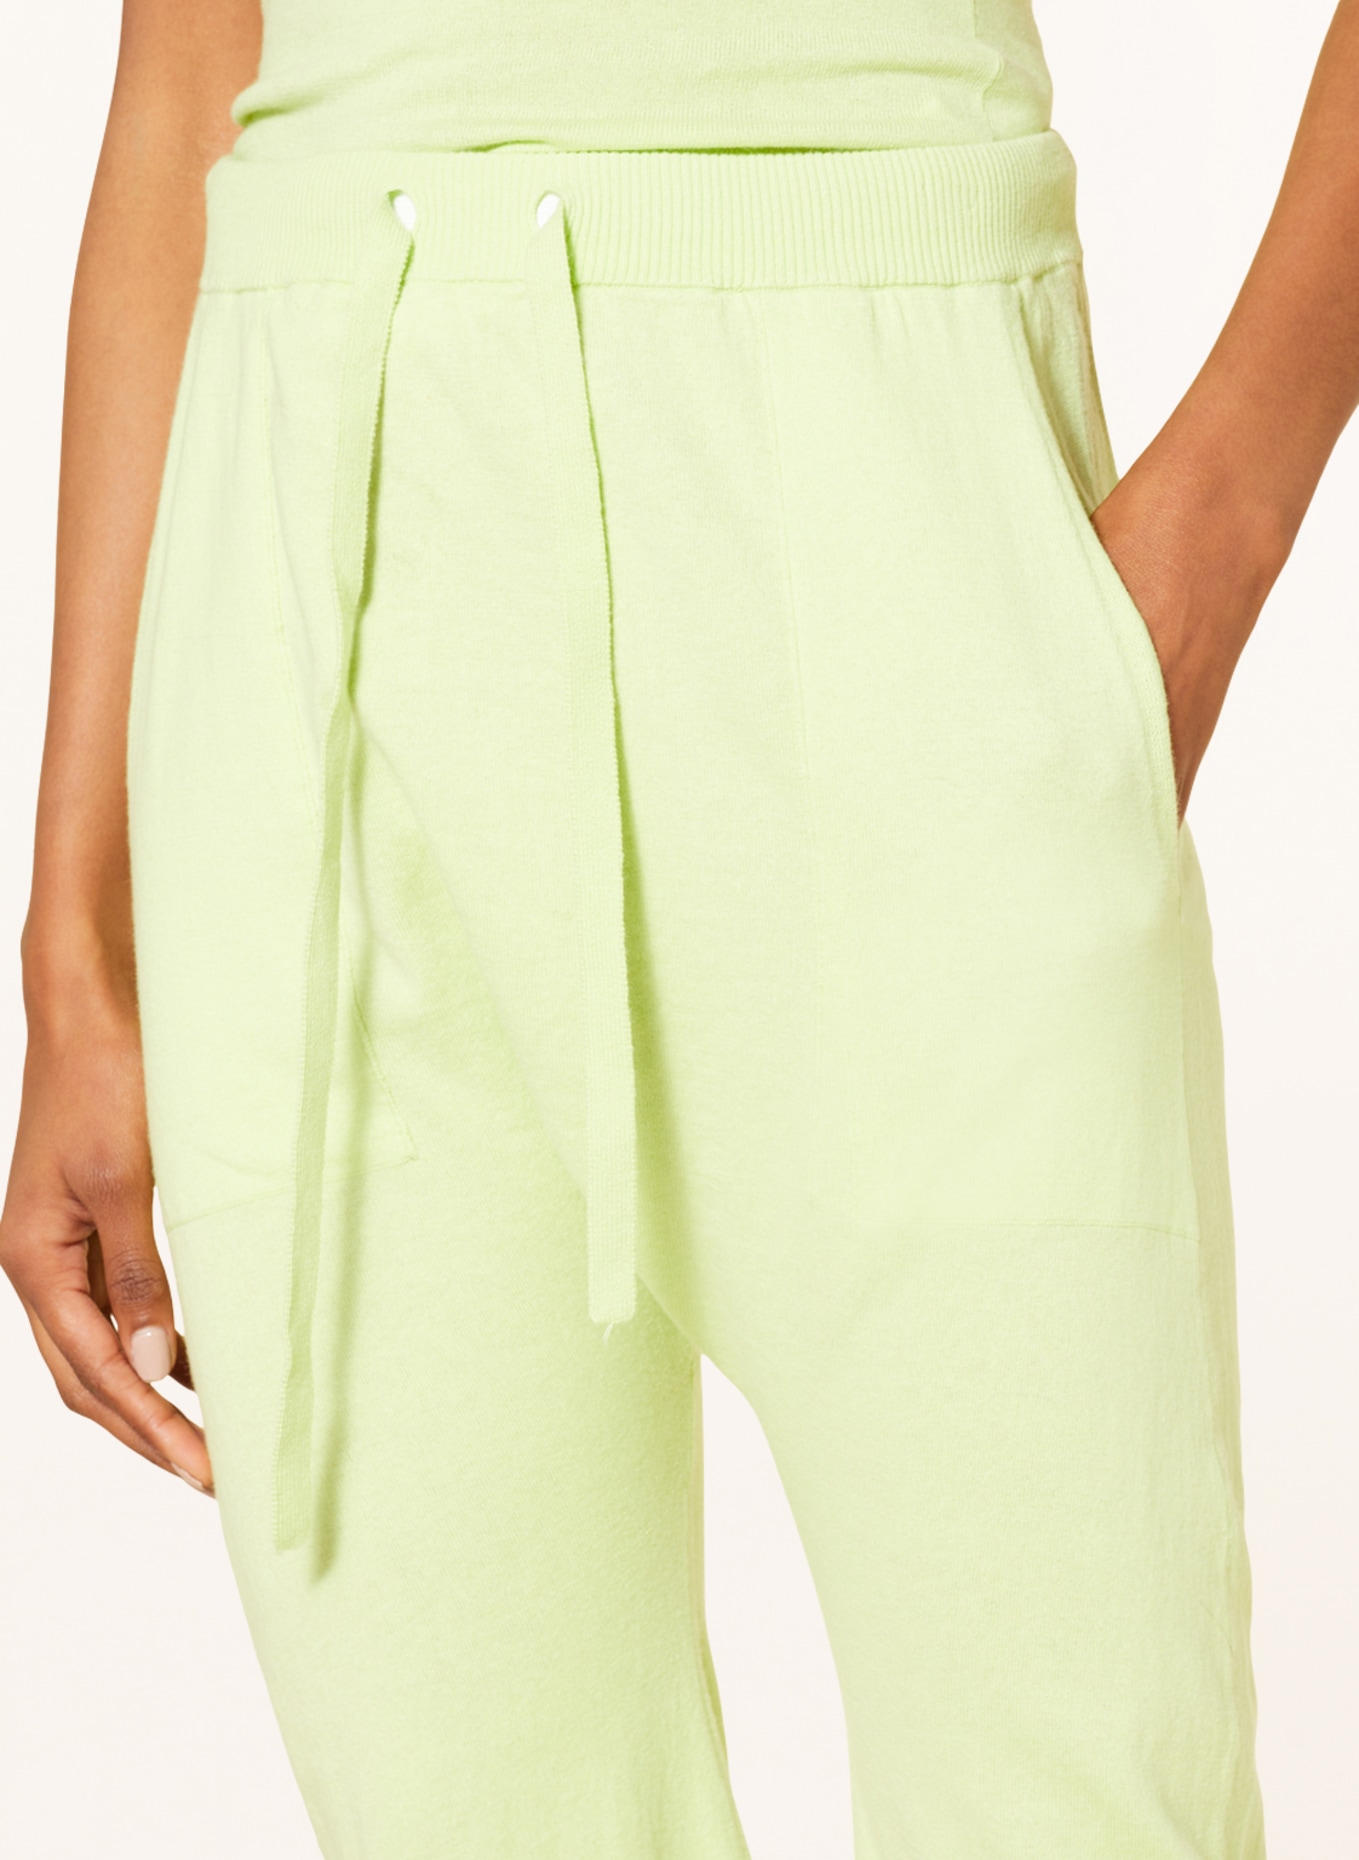 GITTA BANKO 3/4 knit trousers GITTA with cashmere, Color: LIGHT GREEN (Image 5)